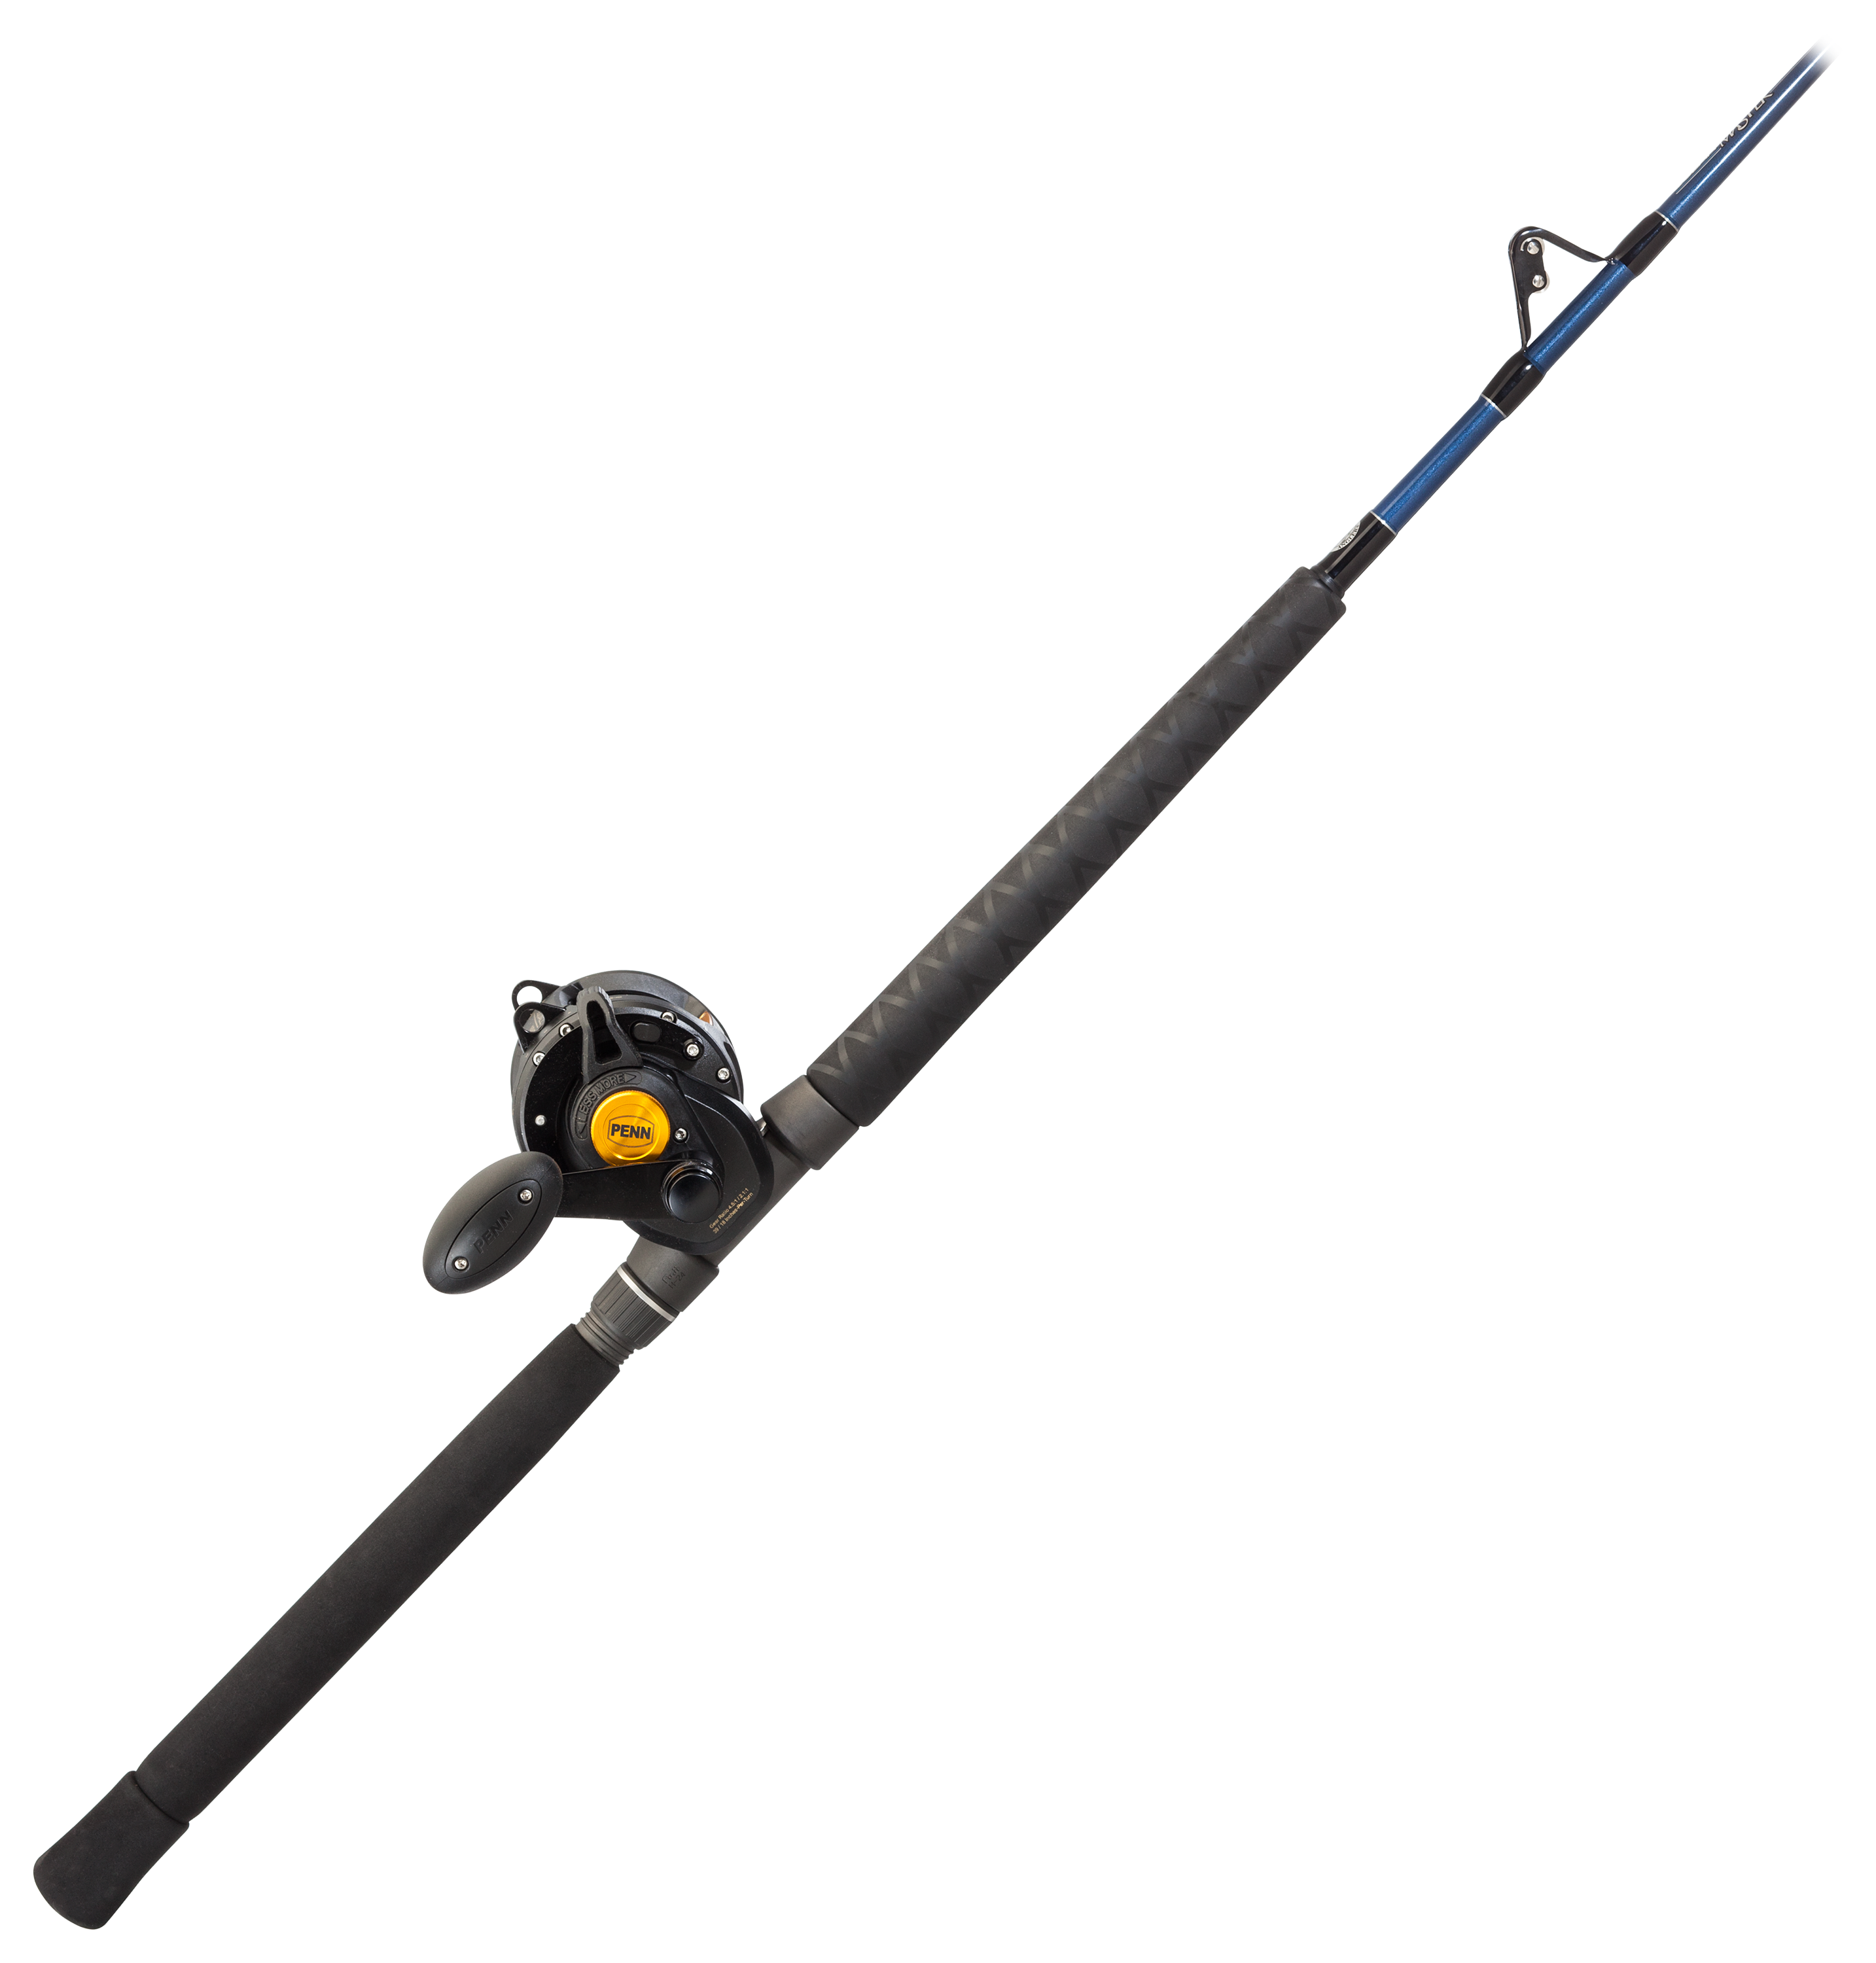 PENN Squall Two-speed Lever Drag Offshore Angler Ocean Master OMSU Stand-Up Rod and Reel Combo - SQL50VSW OMSU-2C